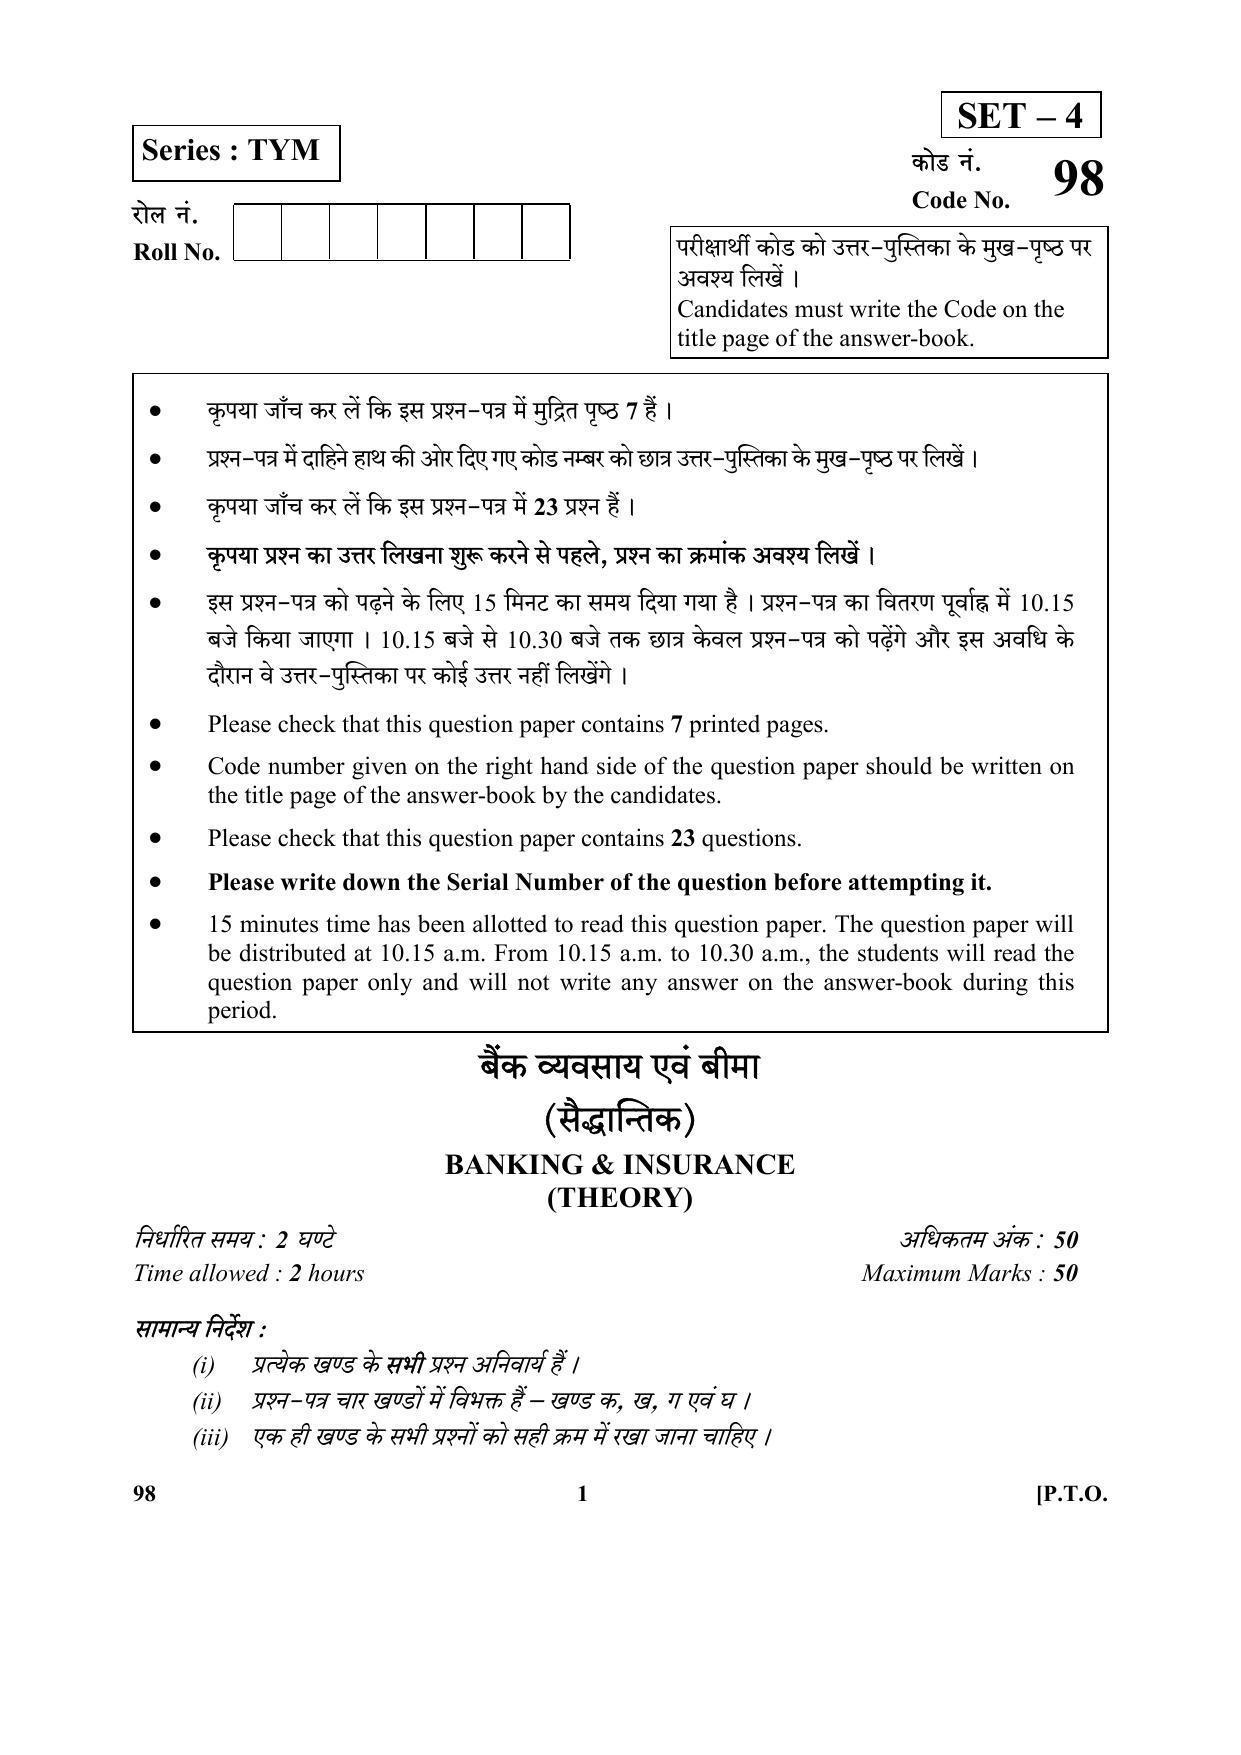 CBSE Class 10 98 (Banking & Insurance) 2018 Question Paper - Page 1